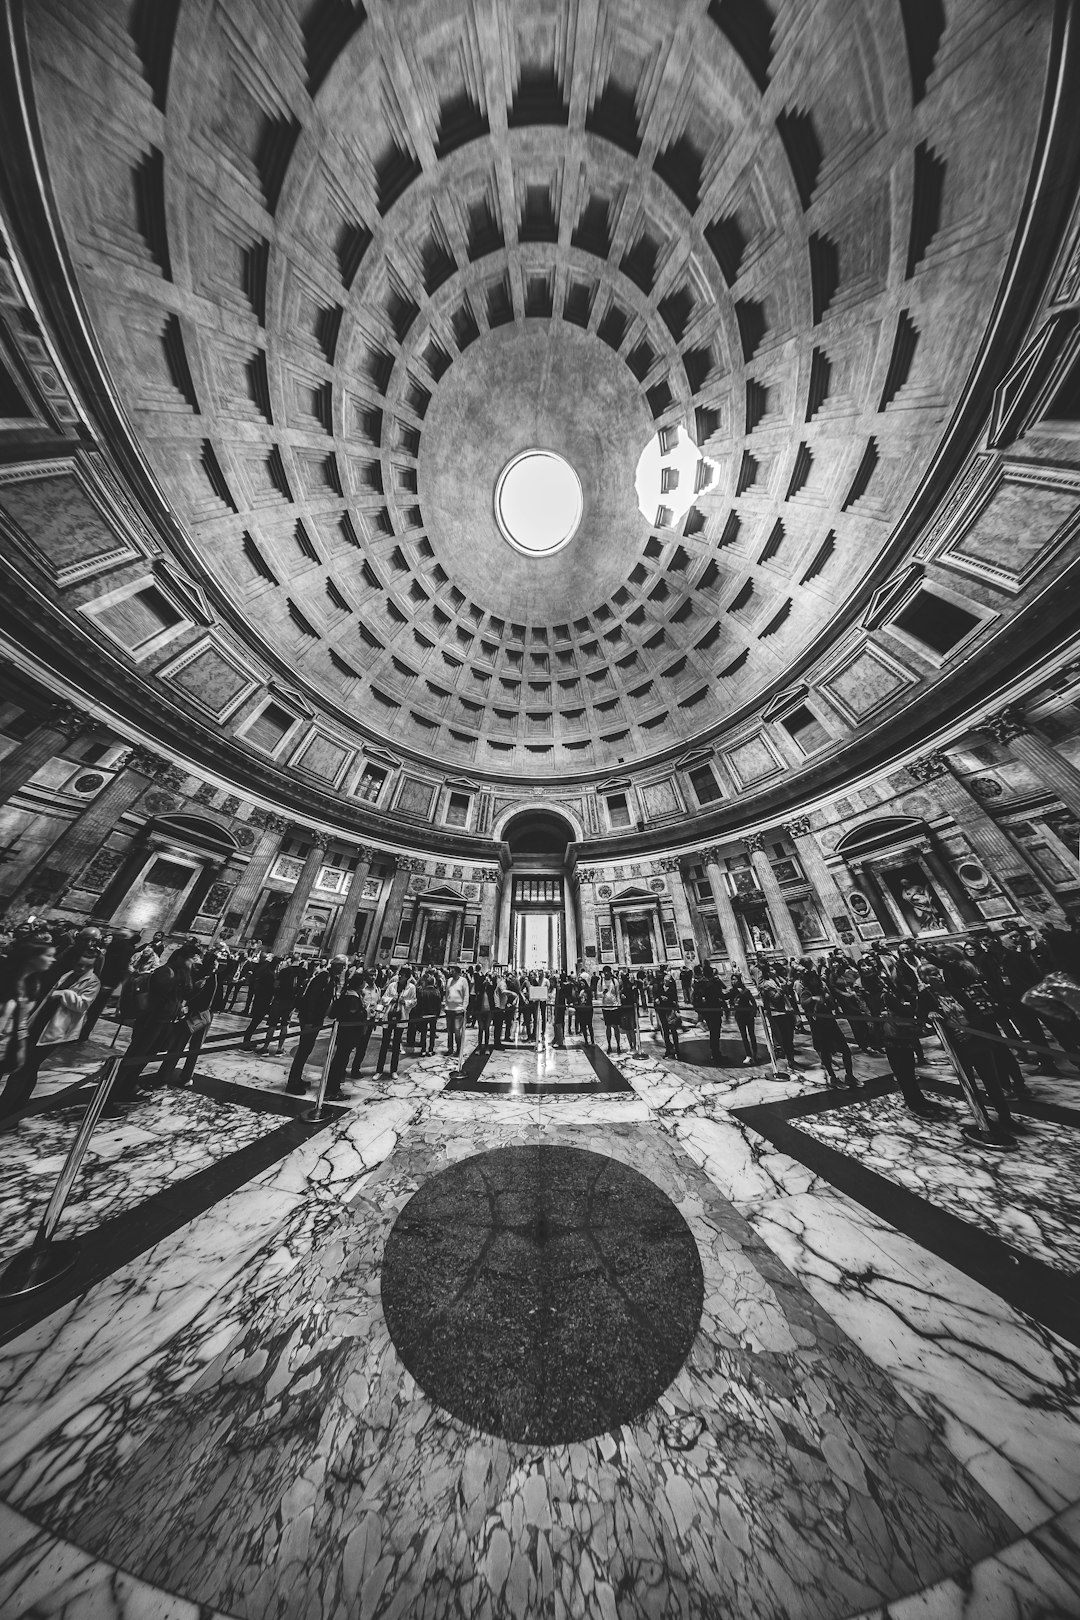 grayscale photography of people inside Pantheon temple in Rome, Italy